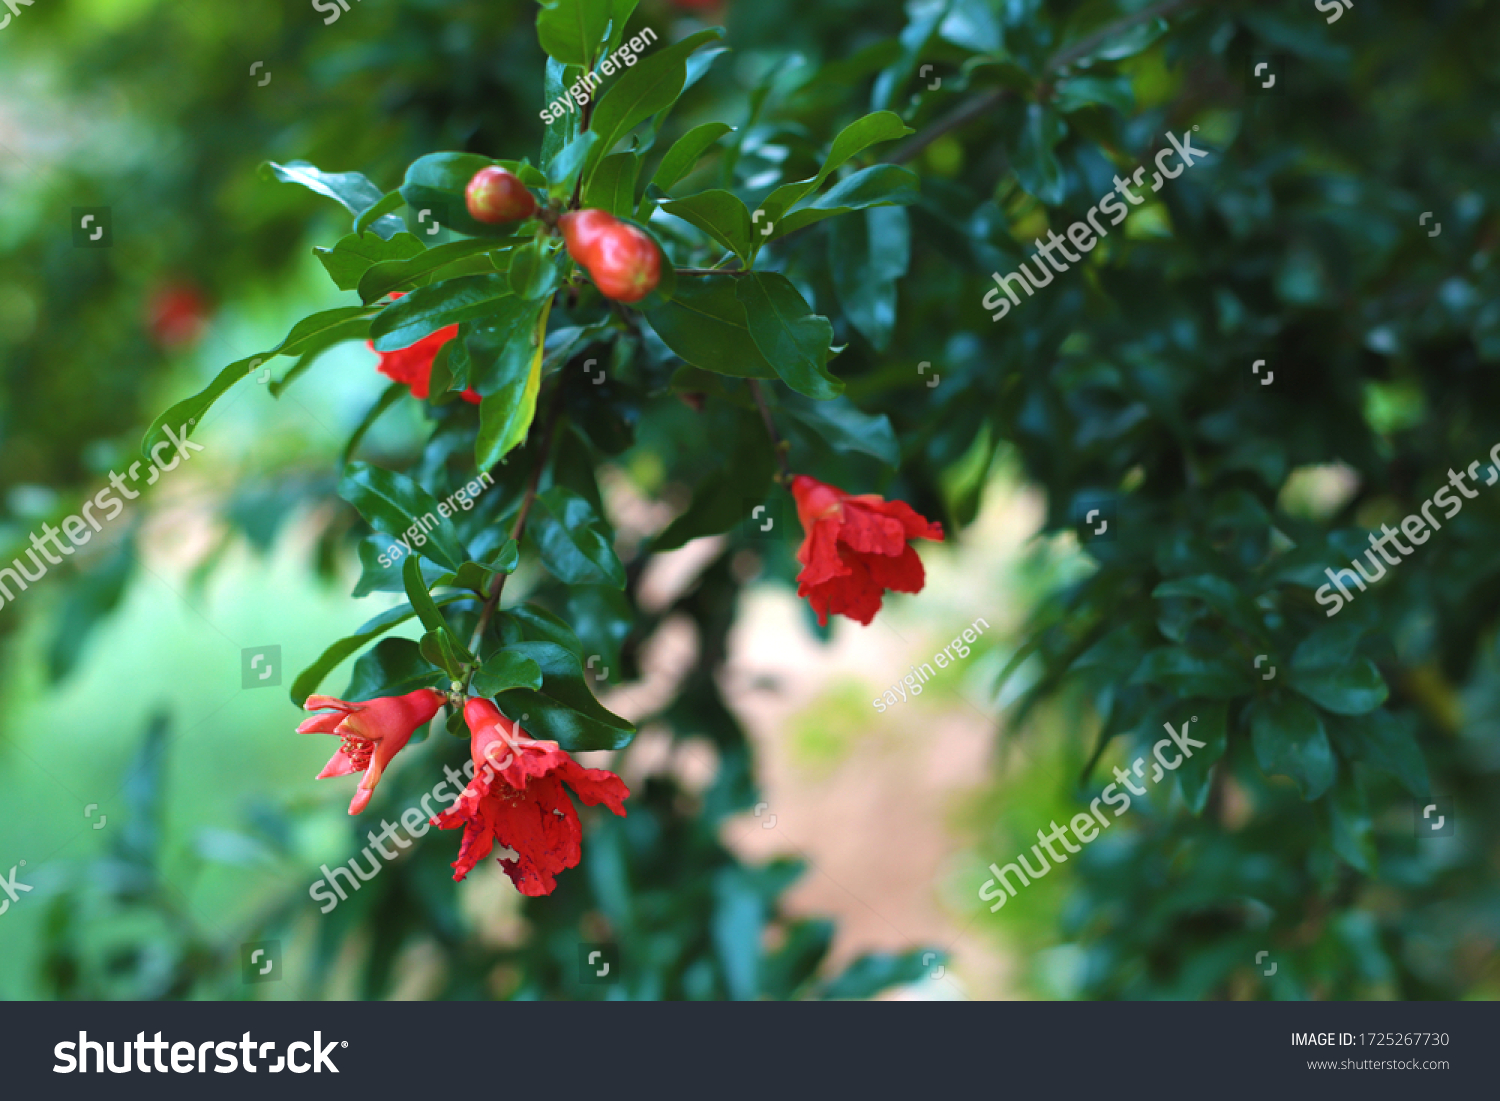 pomegranate tree flowers and leaves #1725267730